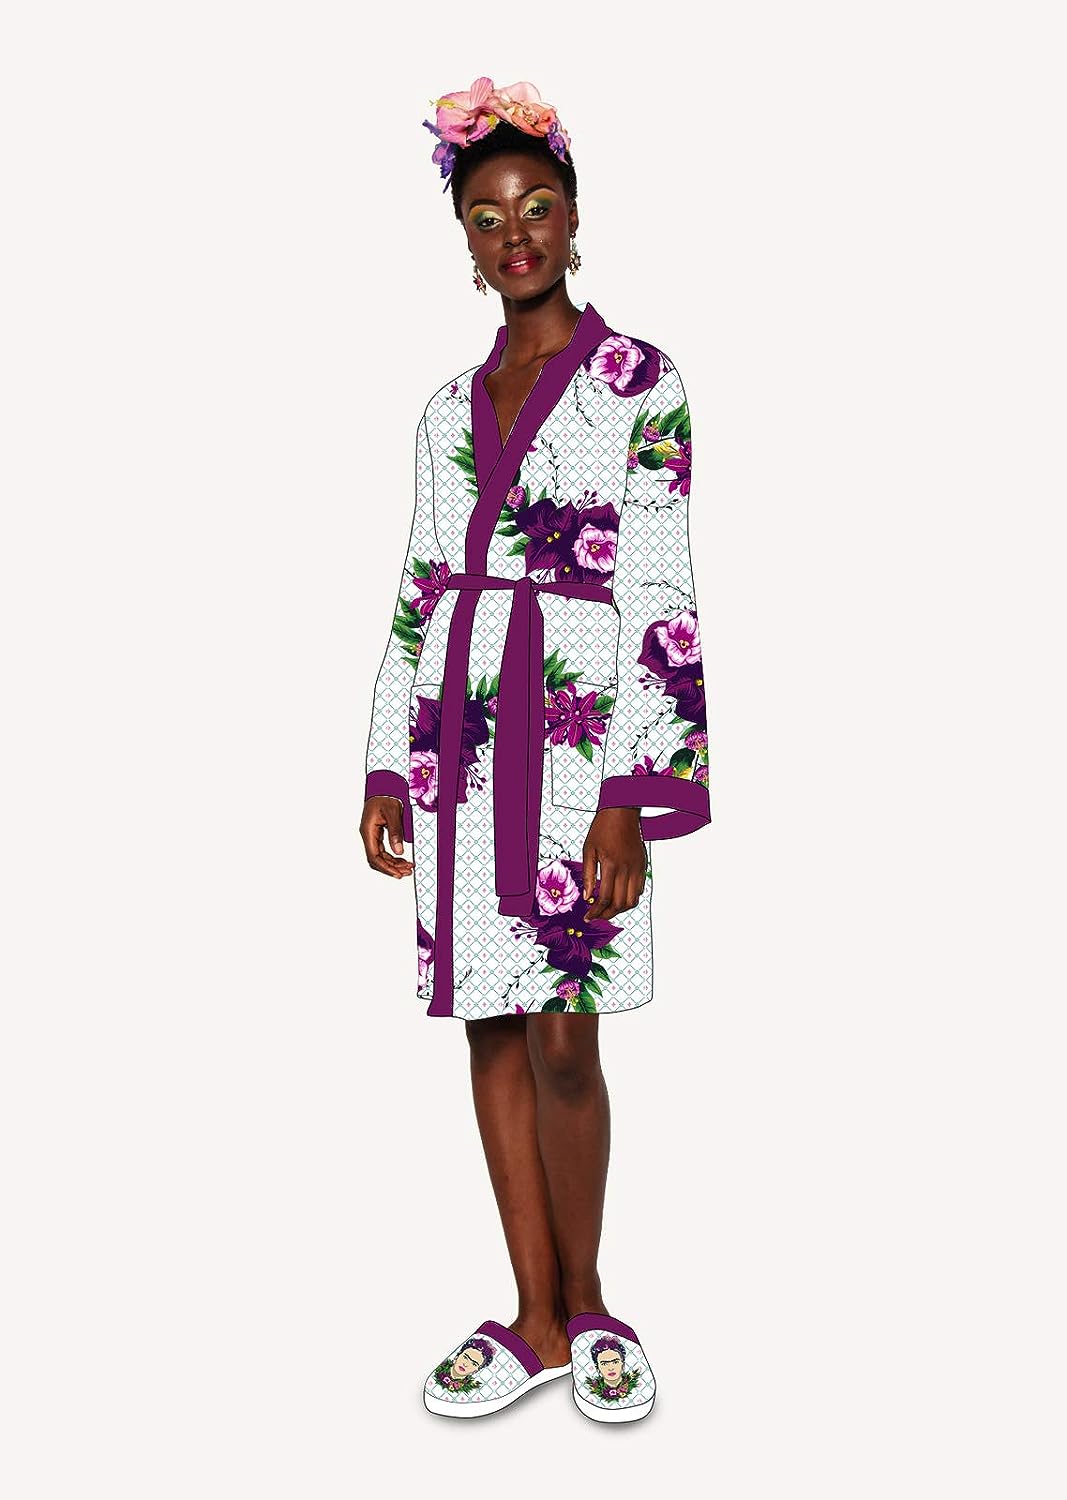 Groovy Frida Kahlo Violet Bouquet Satin Style Ladies Robe One Size RRP 10.39 CLEARANCE XL 7.99